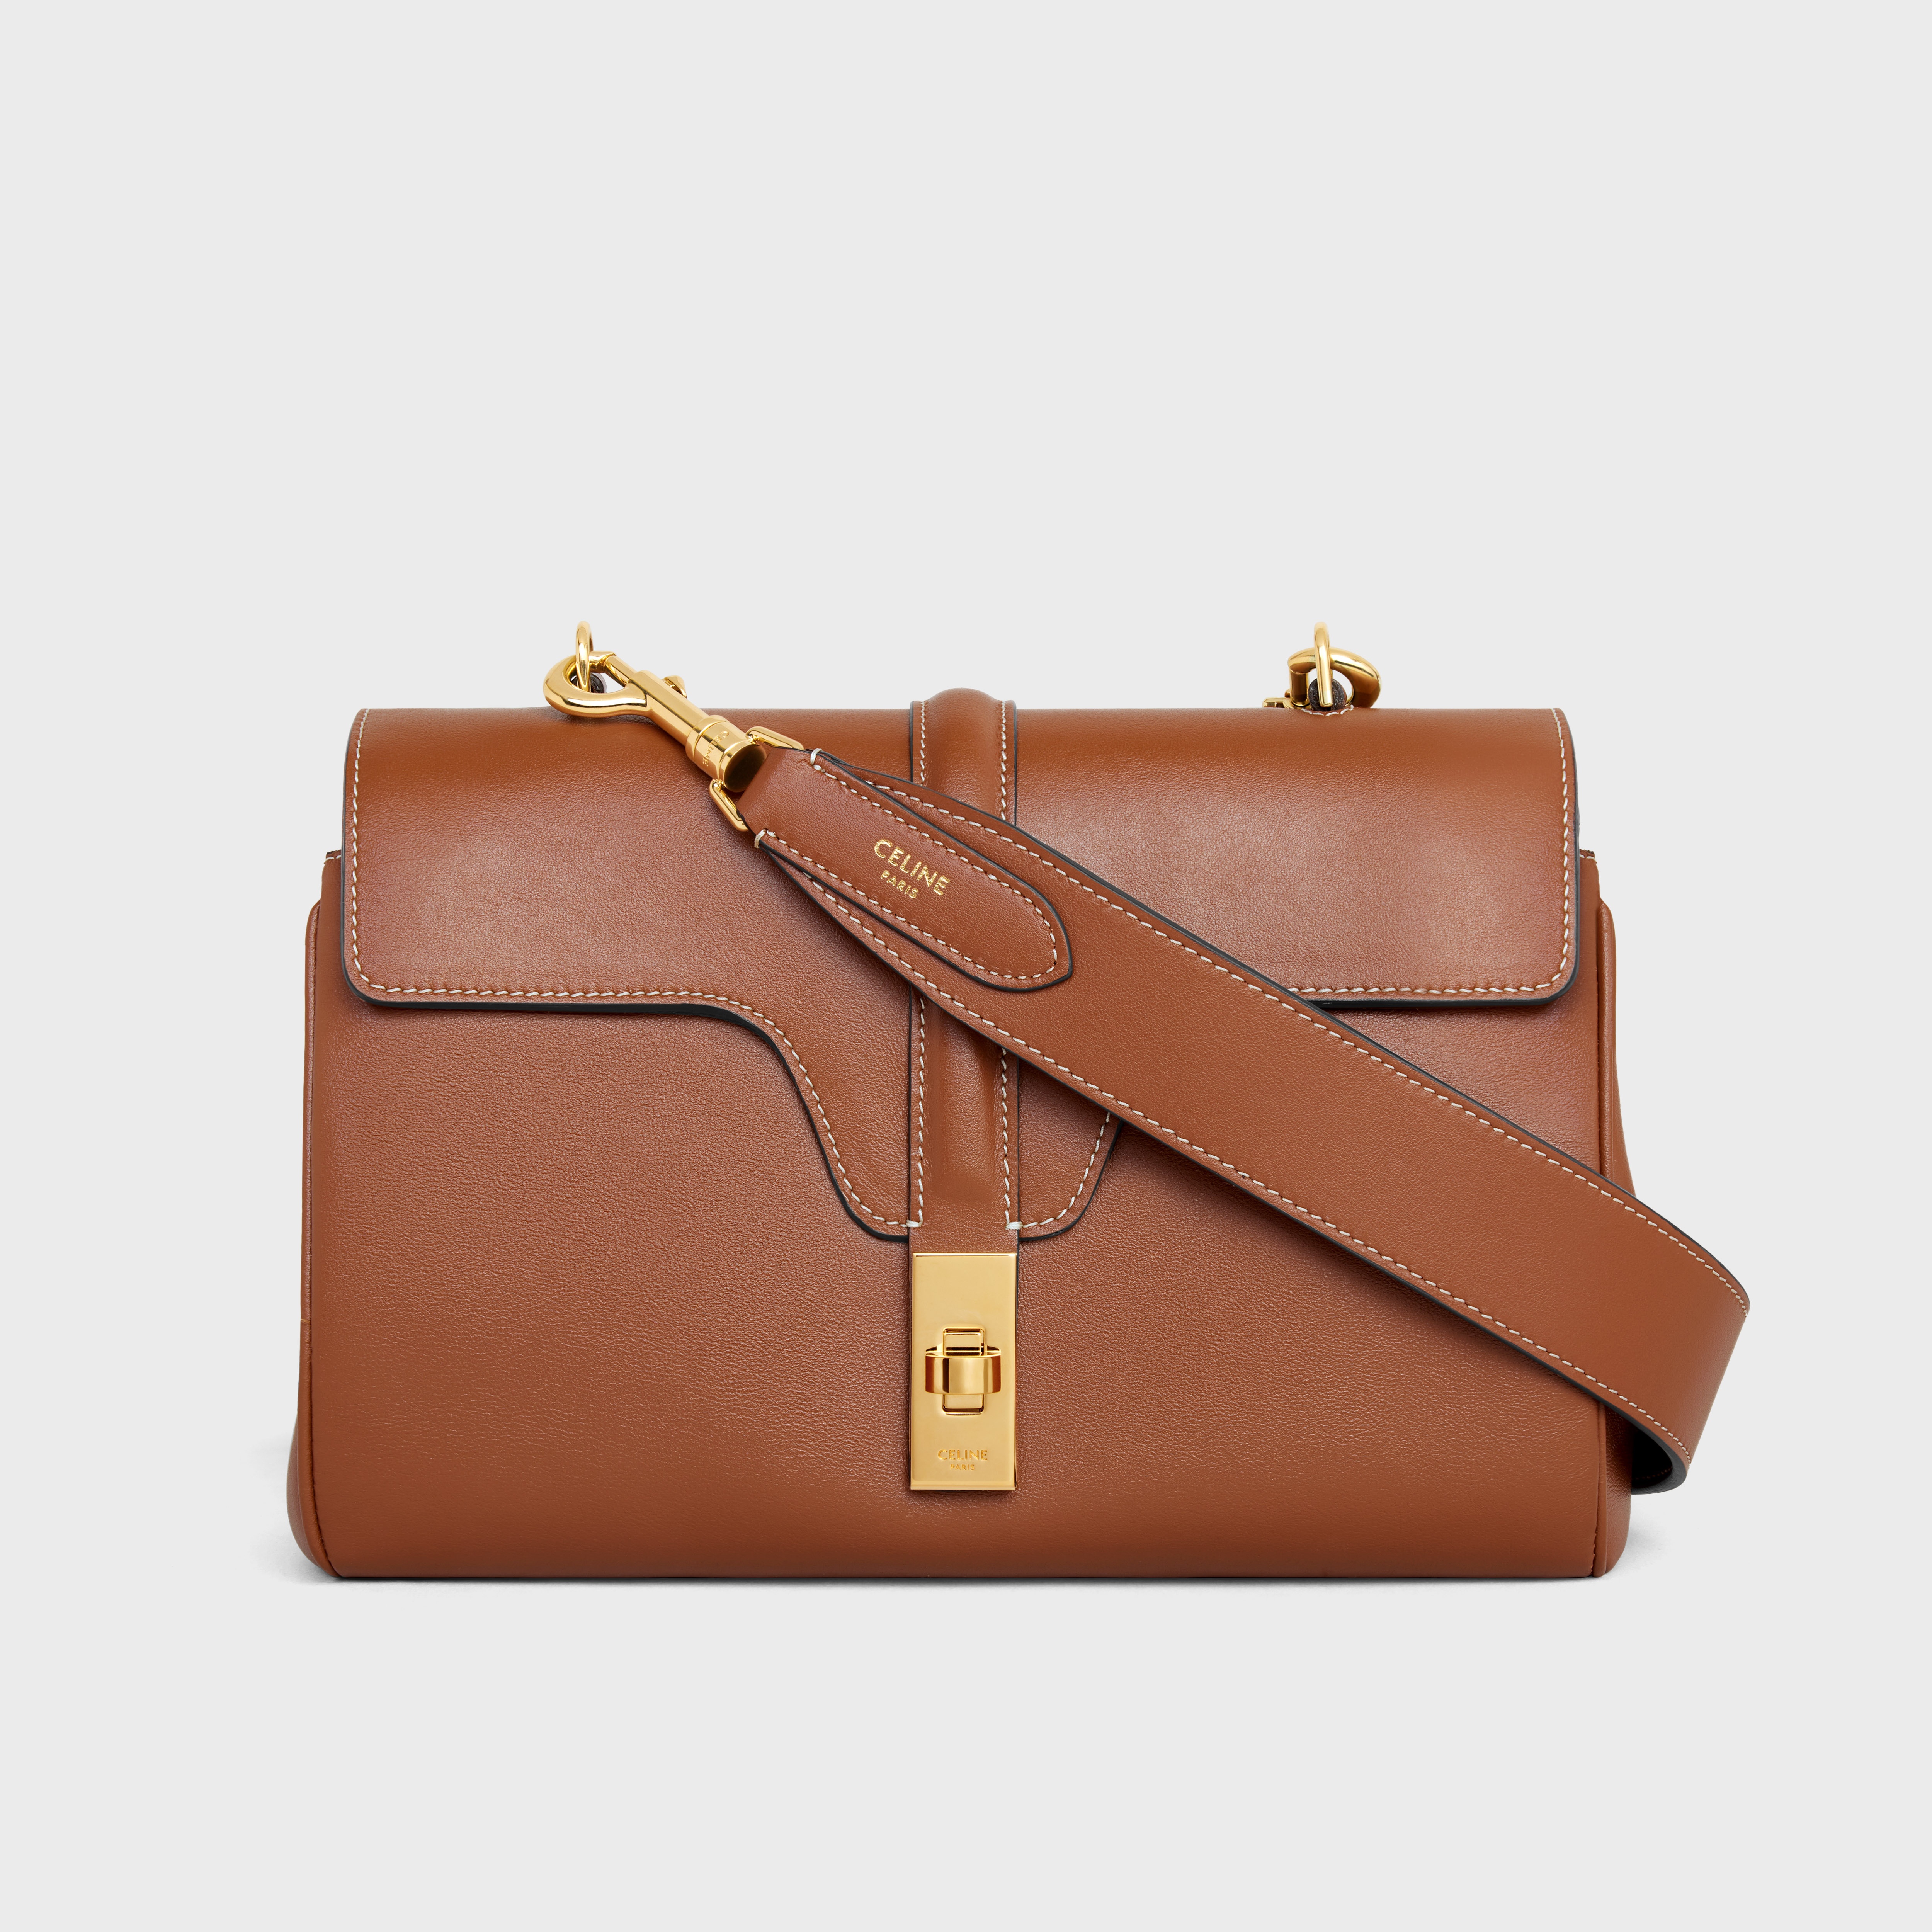 CELINE Long Strap in smooth calfskin with GOLD FINISHING | REVERSIBLE